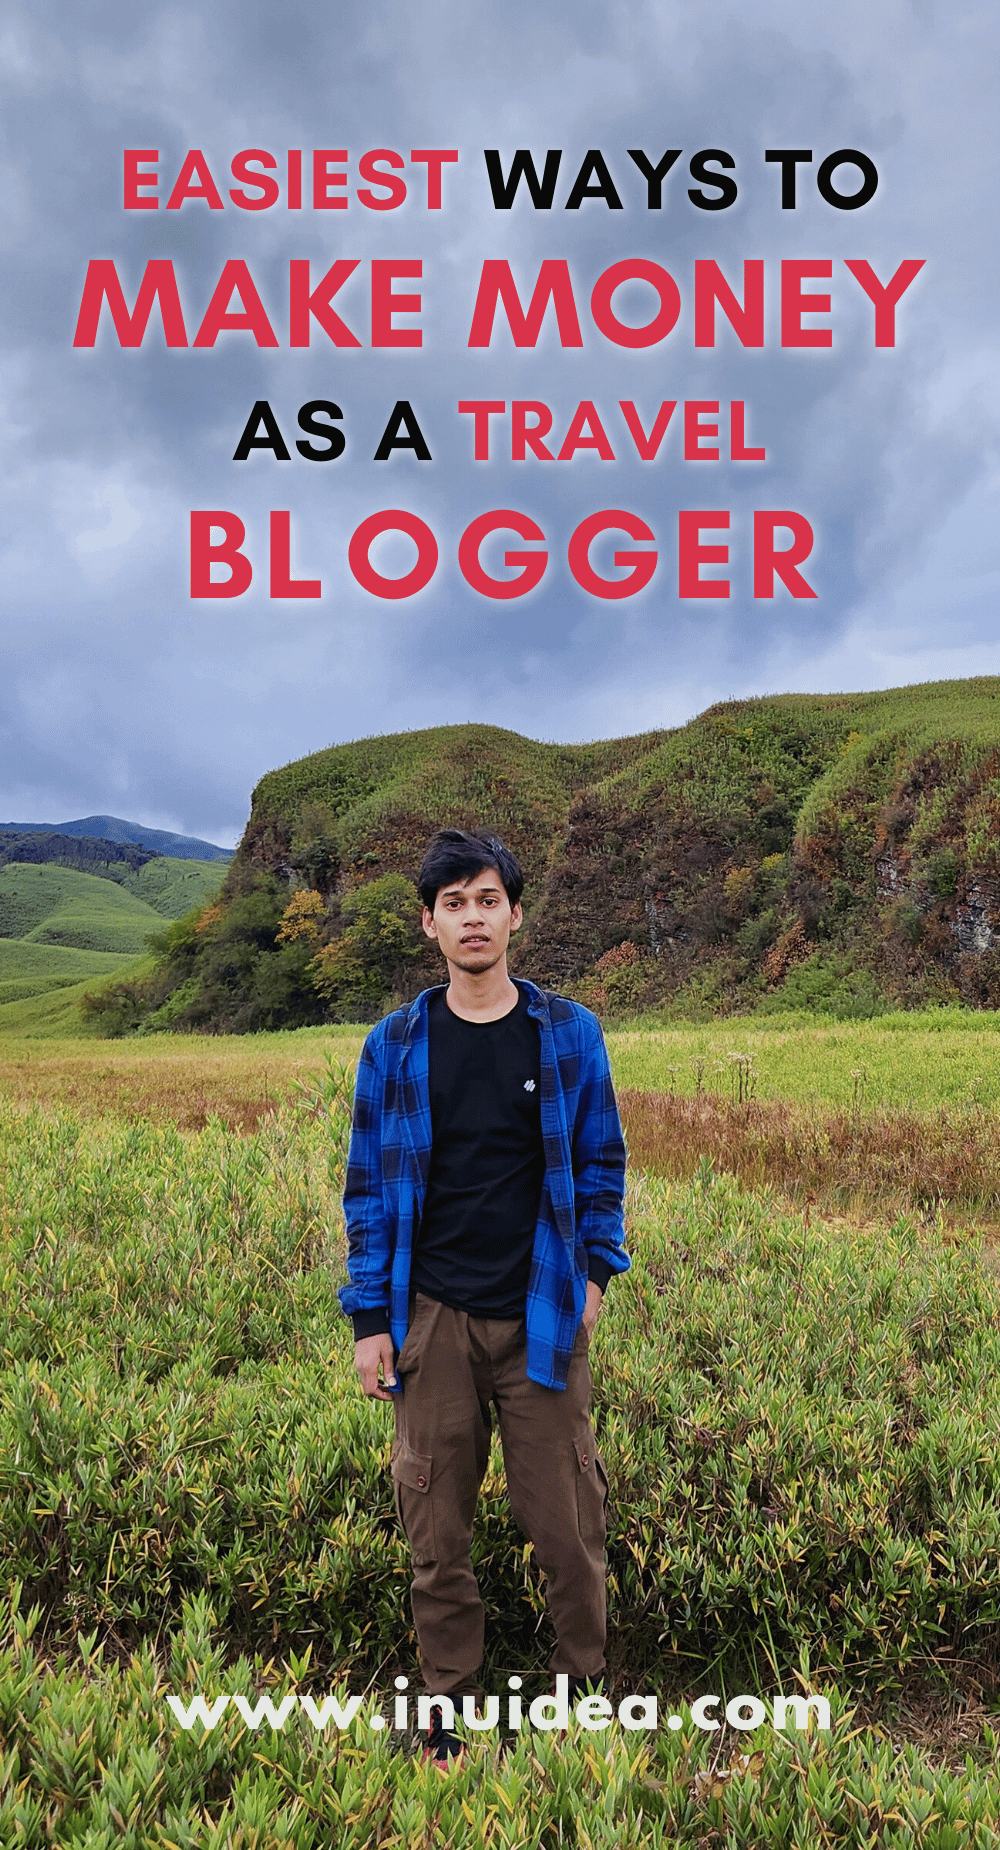 The easiest ways to make money as a travel blogger